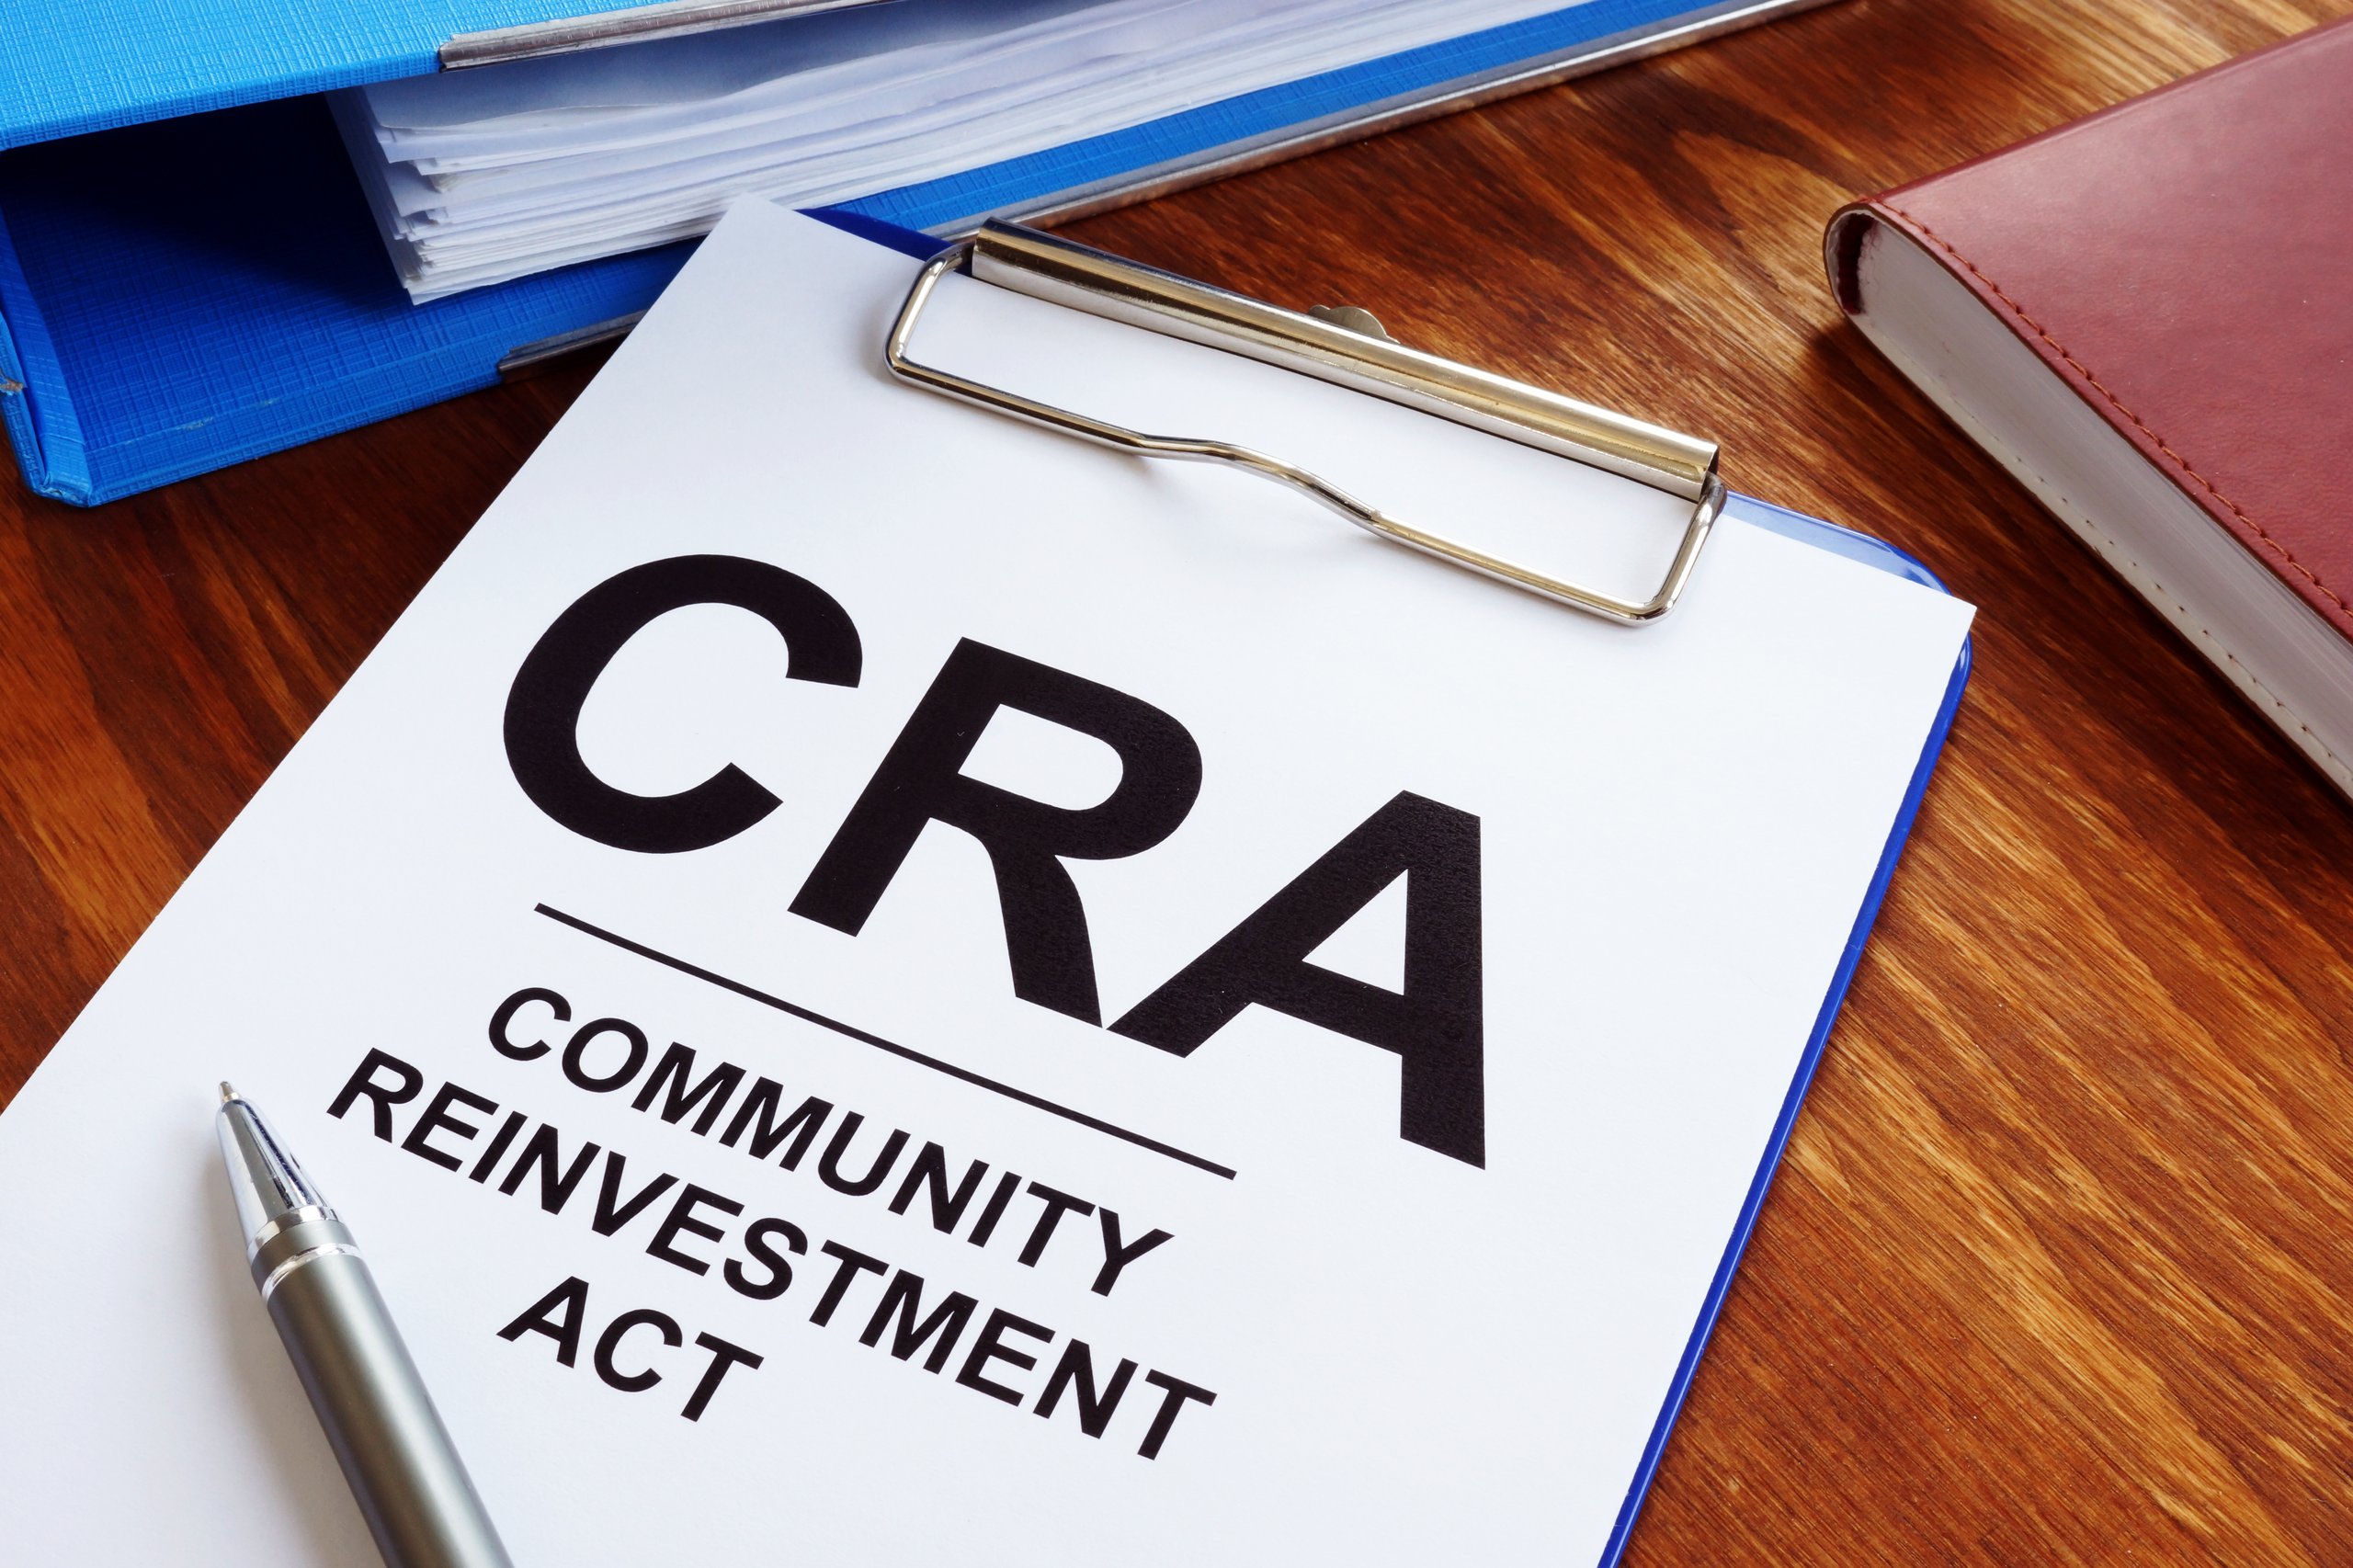 Fed Releases Community Reinvestment Act (CRA) Modernization Proposal